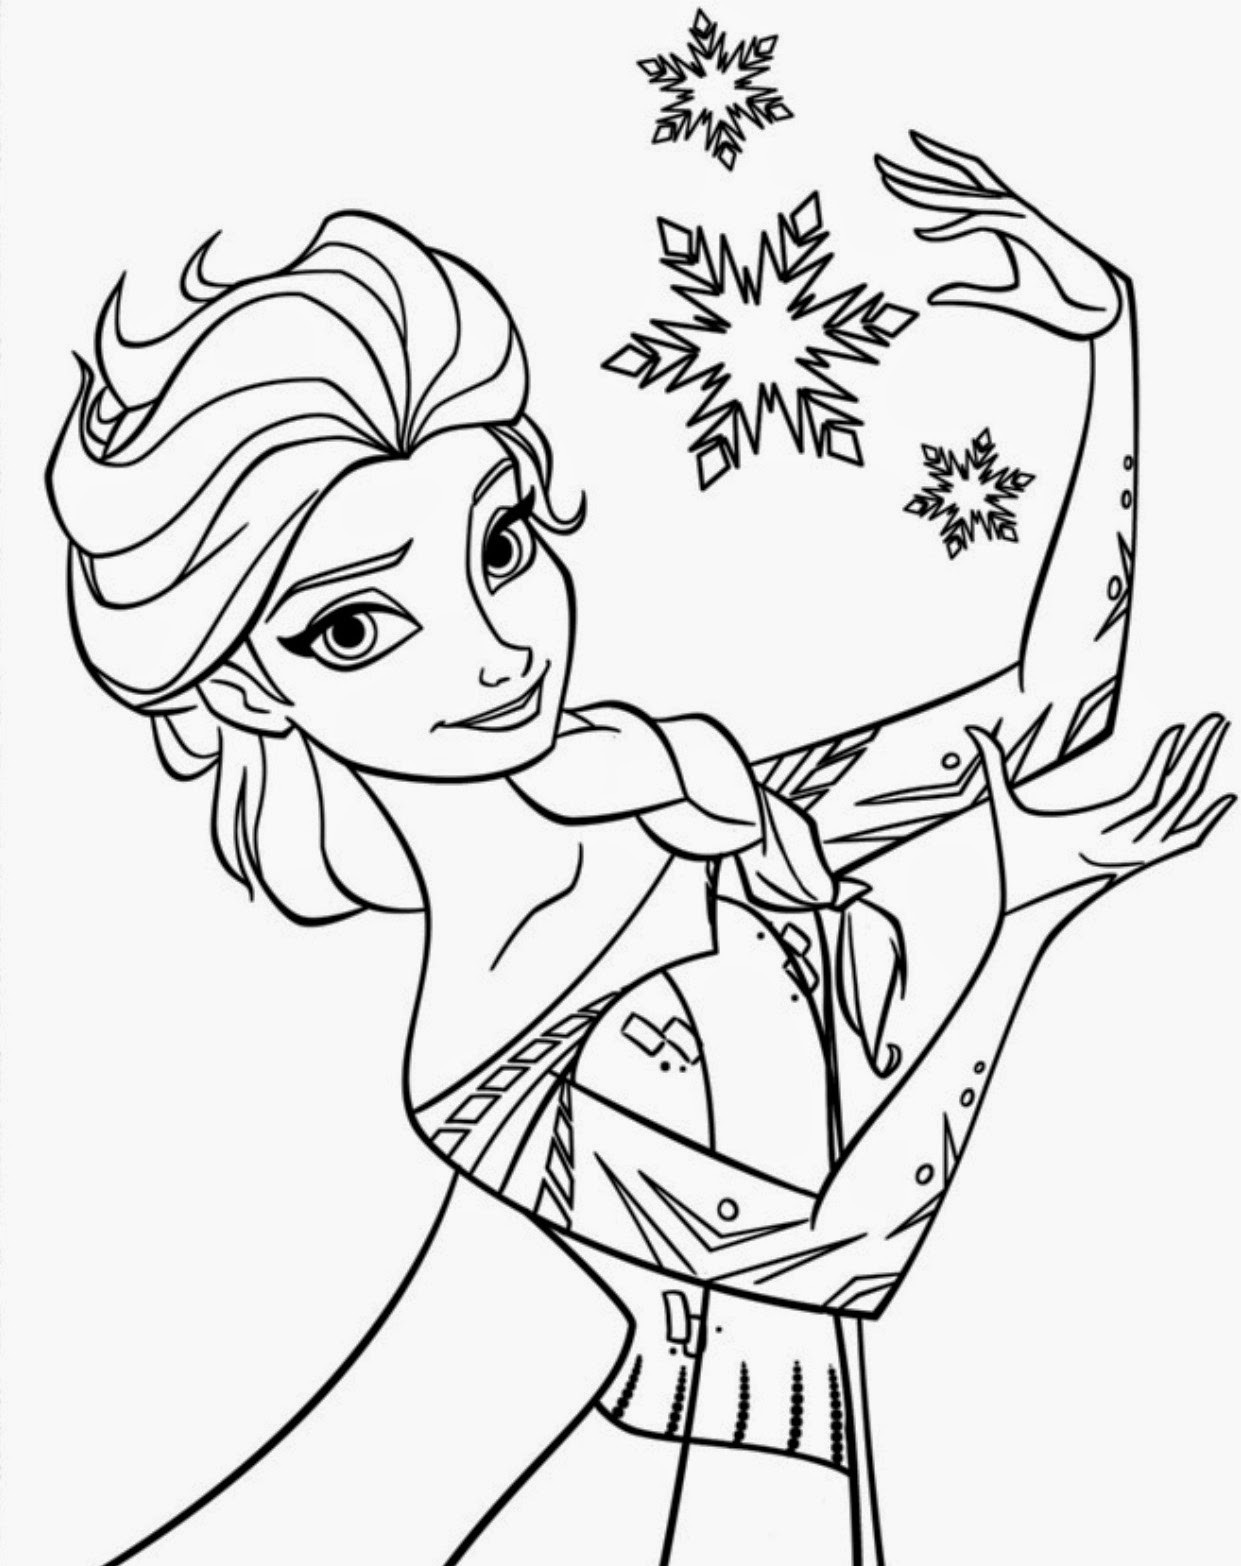 Disney Printable Coloring Pages
 15 Beautiful Disney Frozen Coloring Pages Free Instant